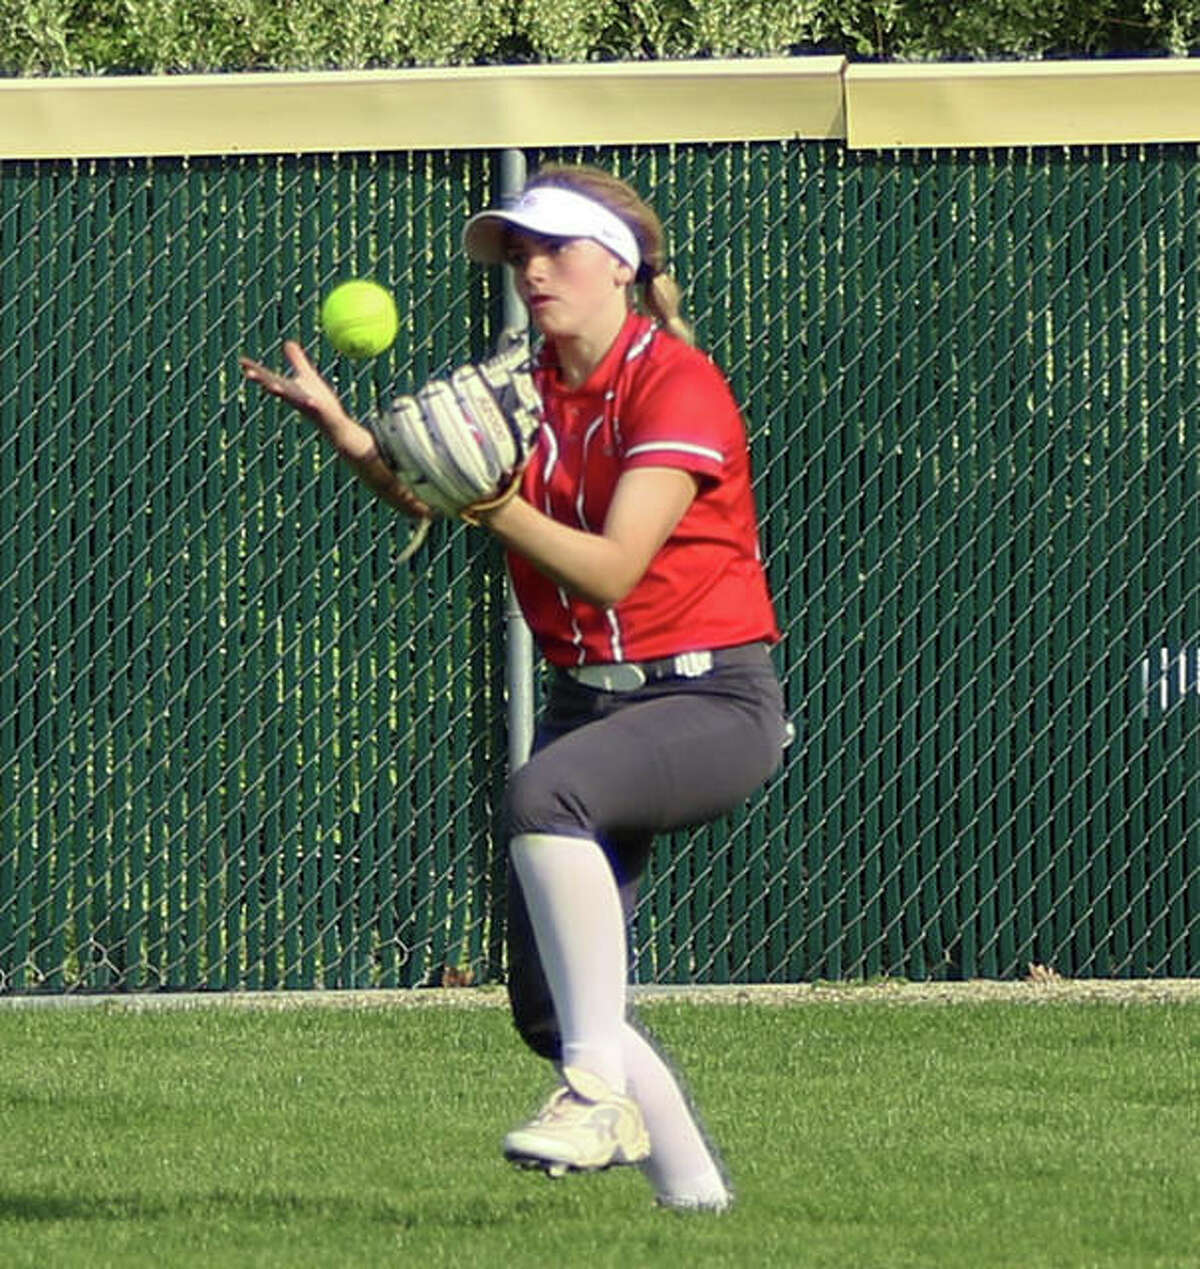 Alton right fielder Lauren O’Neill bobbles a fly ball, but makes the catch against Triad on Monday at Alton High in Godfrey.